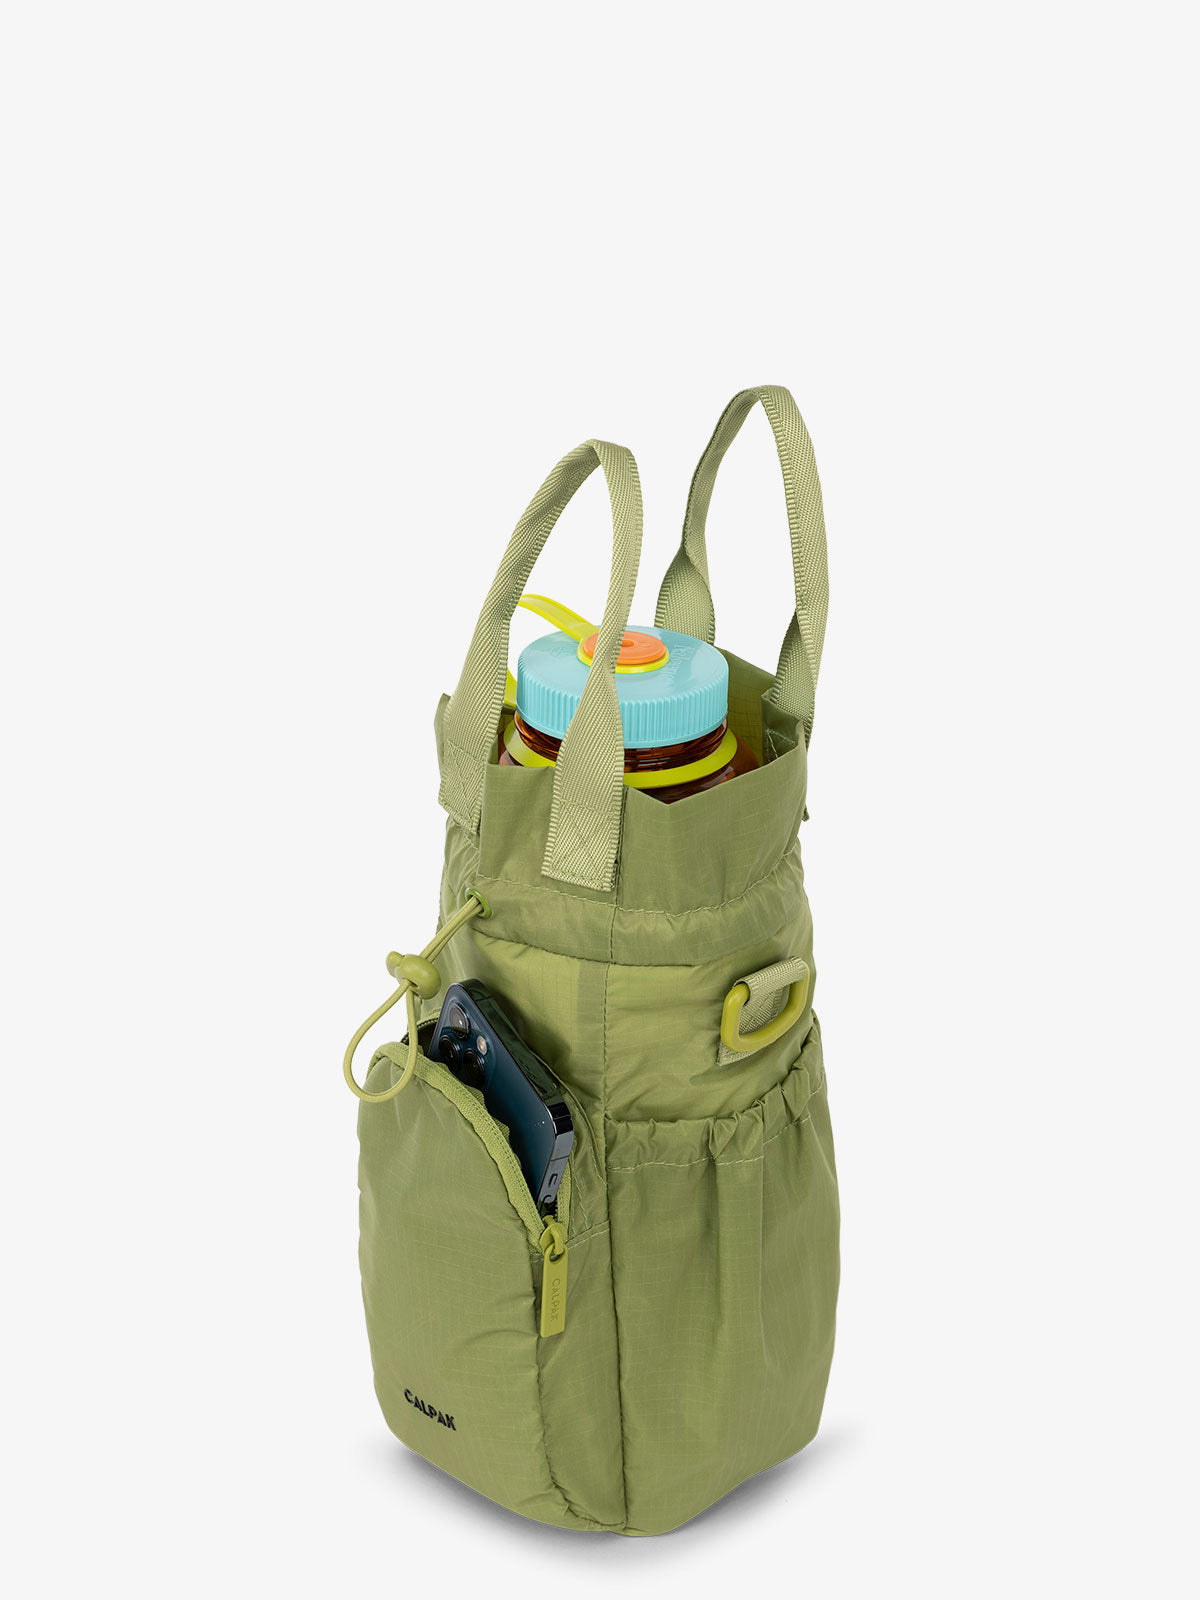 CALPAK Water Bottle carrier with zippered pocket in palm green